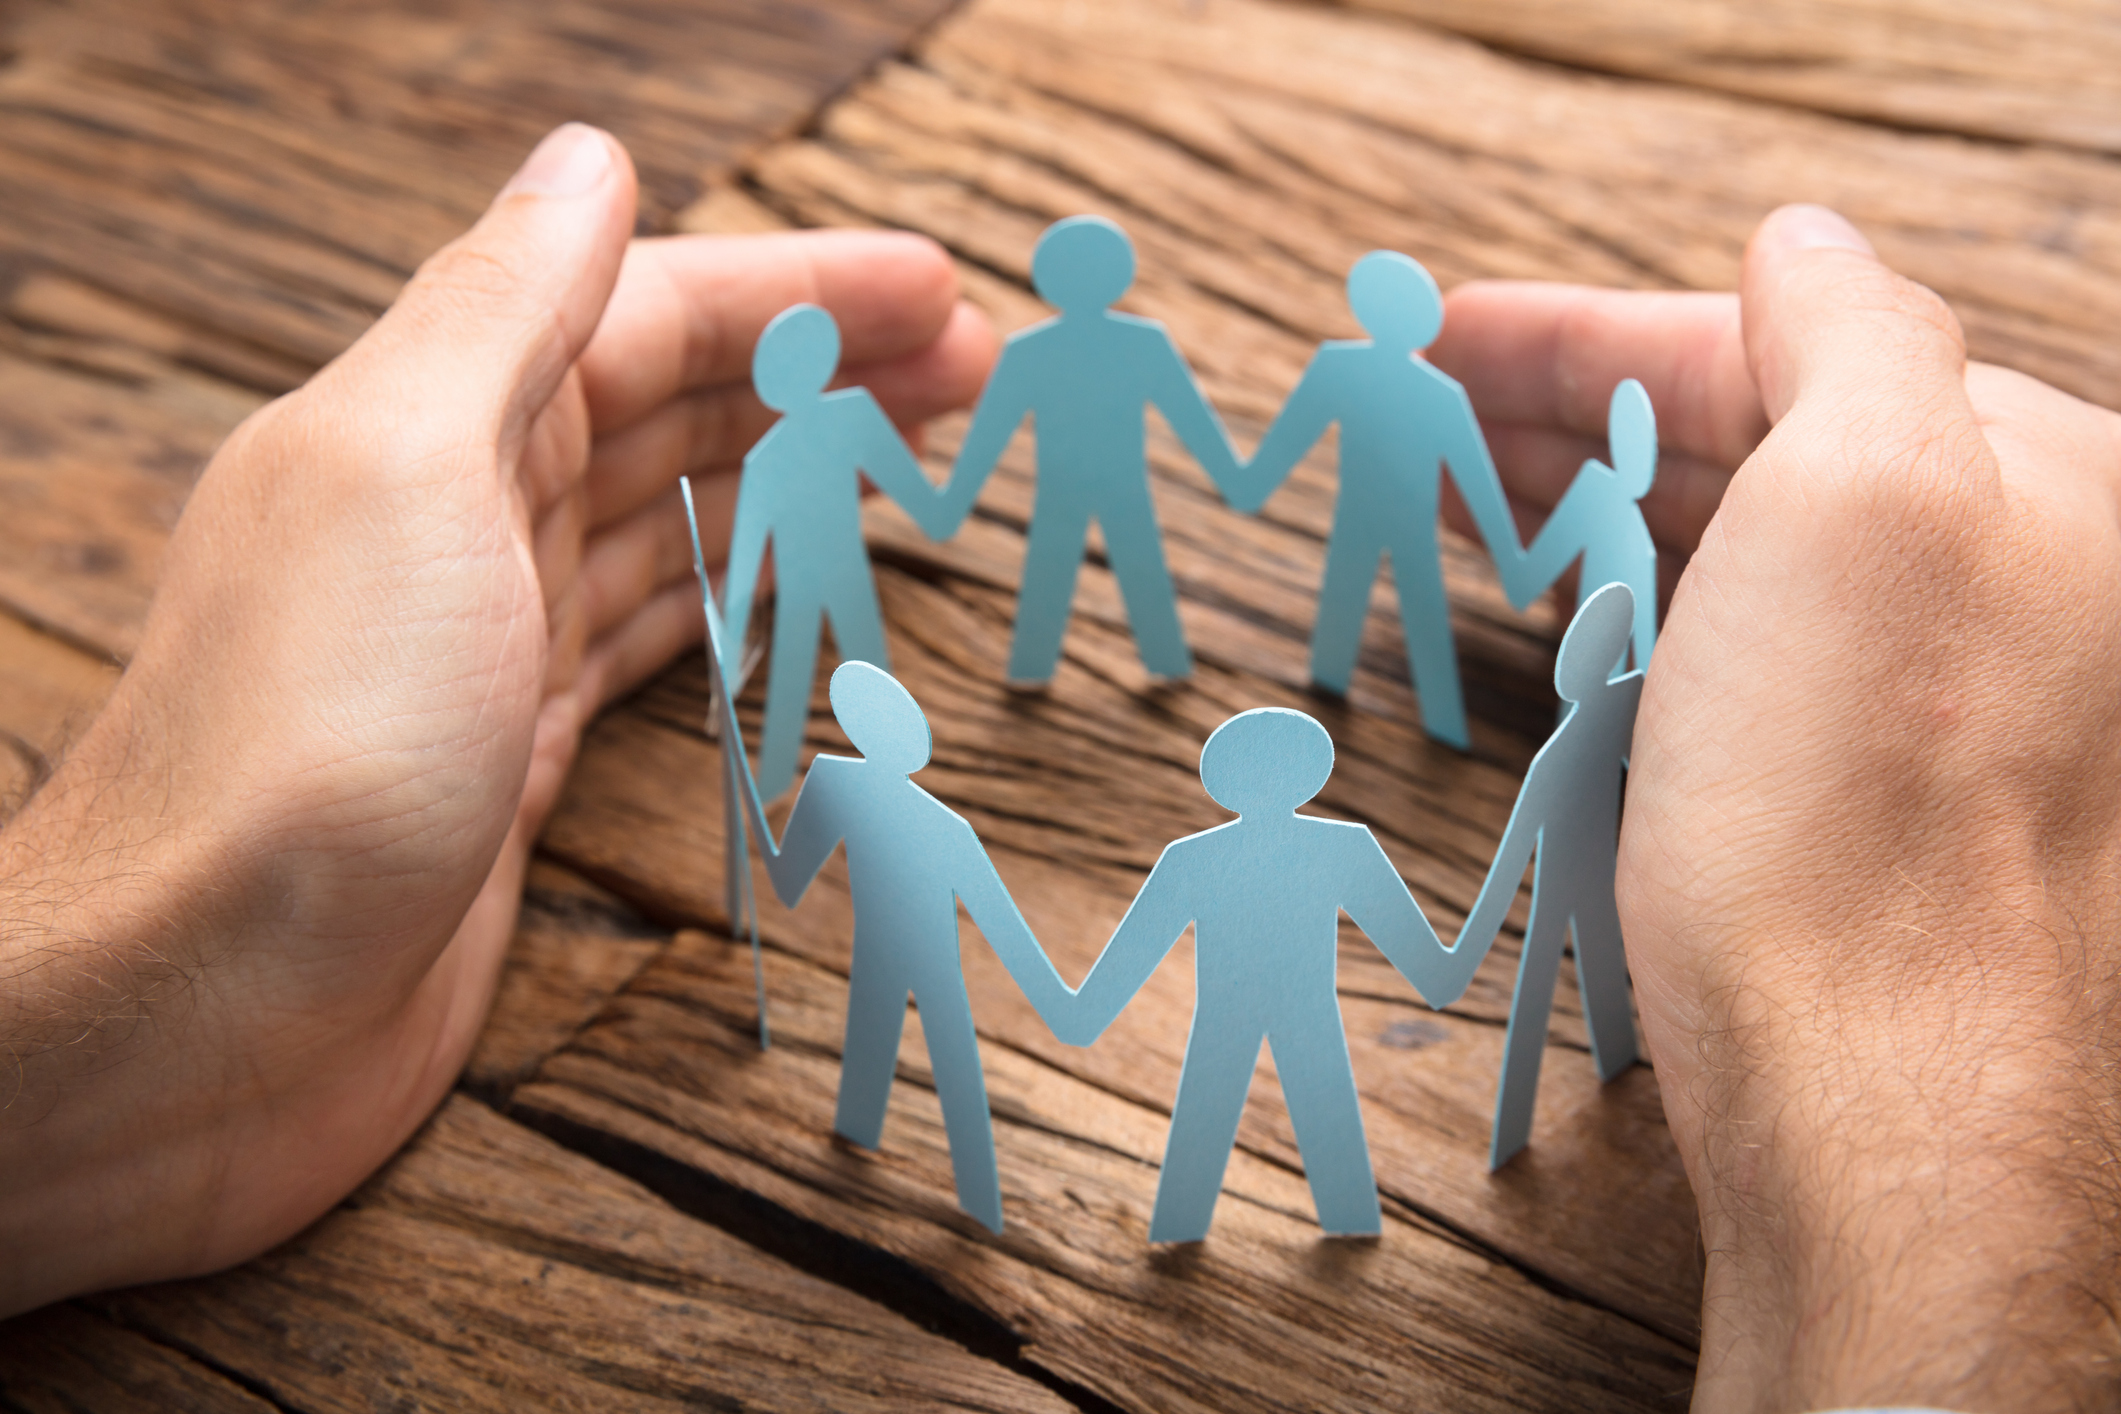 Image of two hands around a group of paper cut out people that are holding hands in a circle on a wooden table